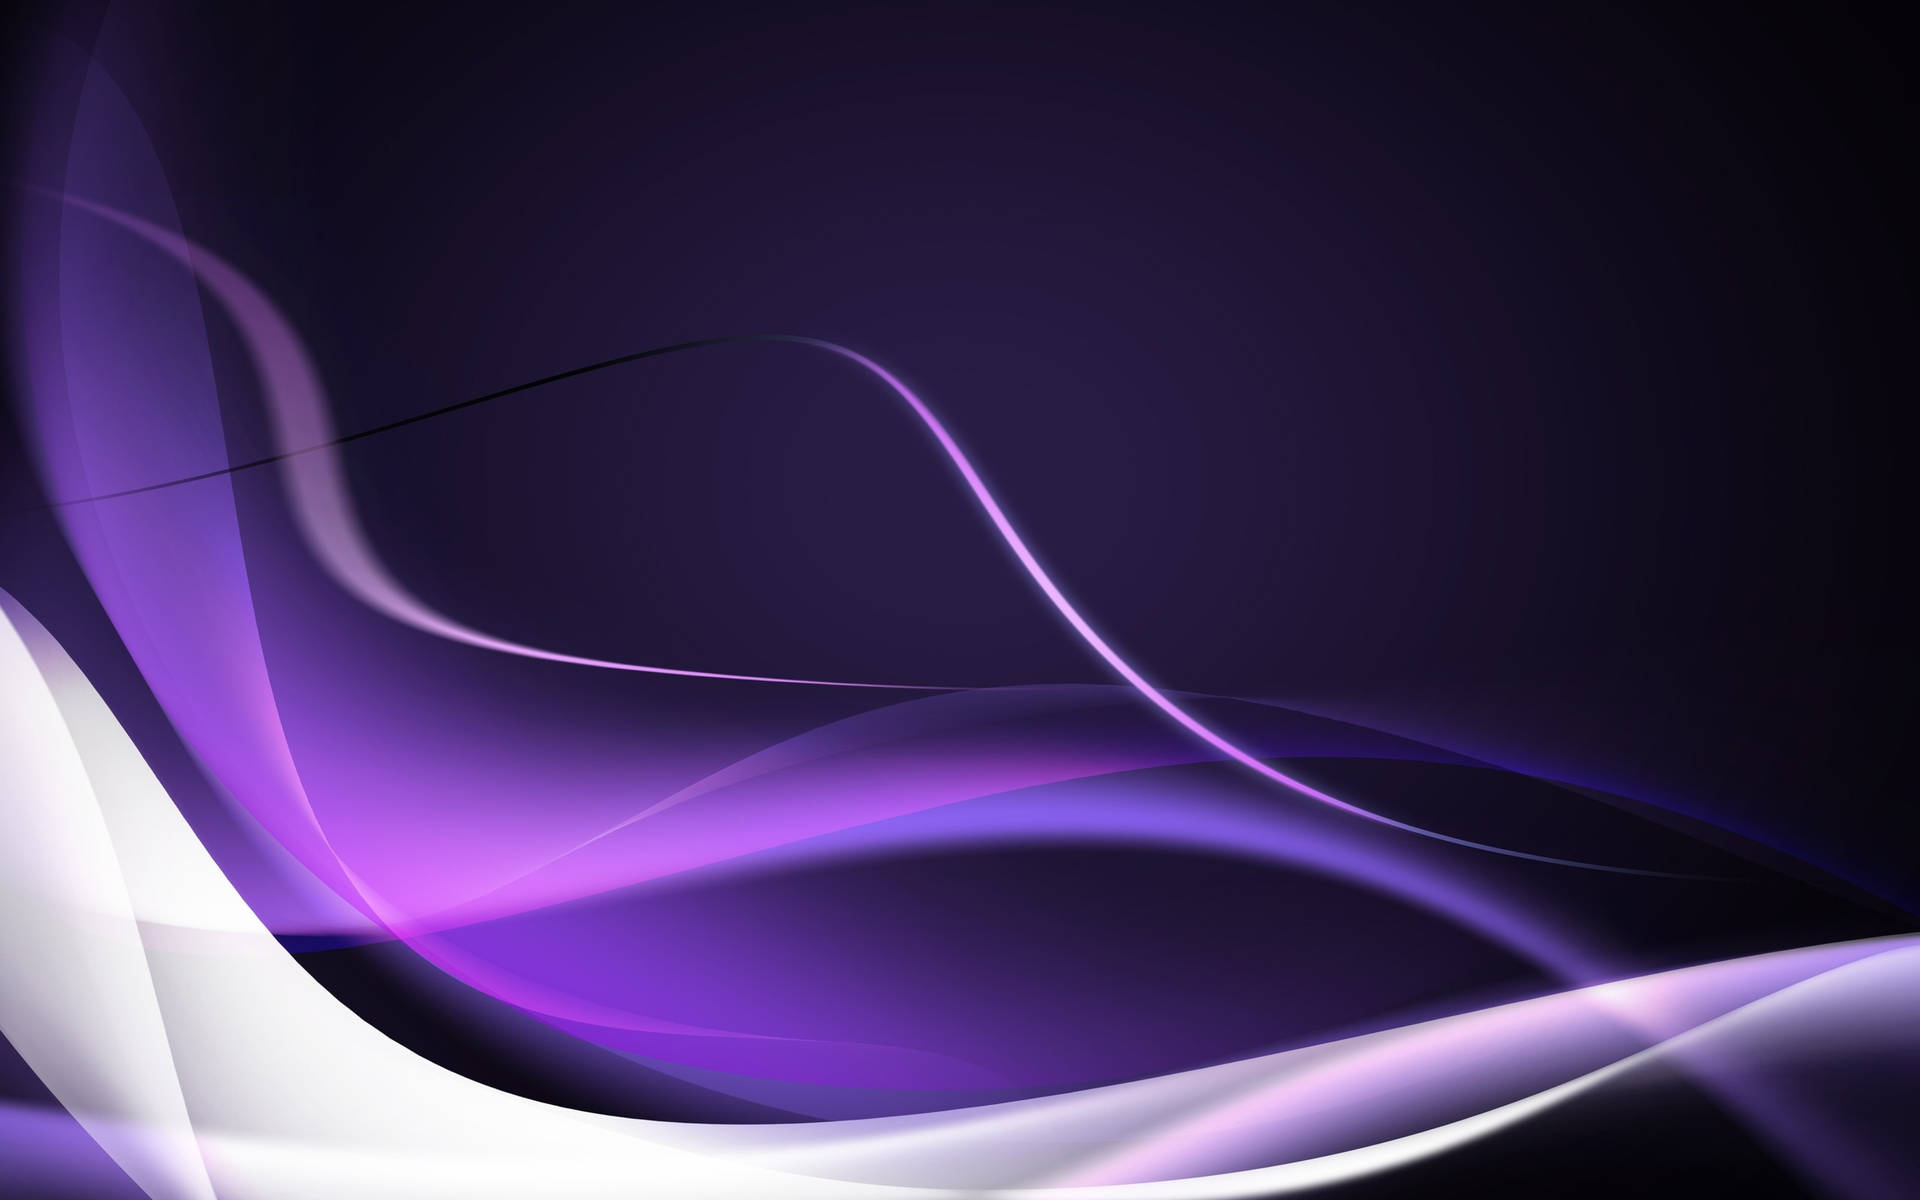 An abstract design of purple waves Wallpaper